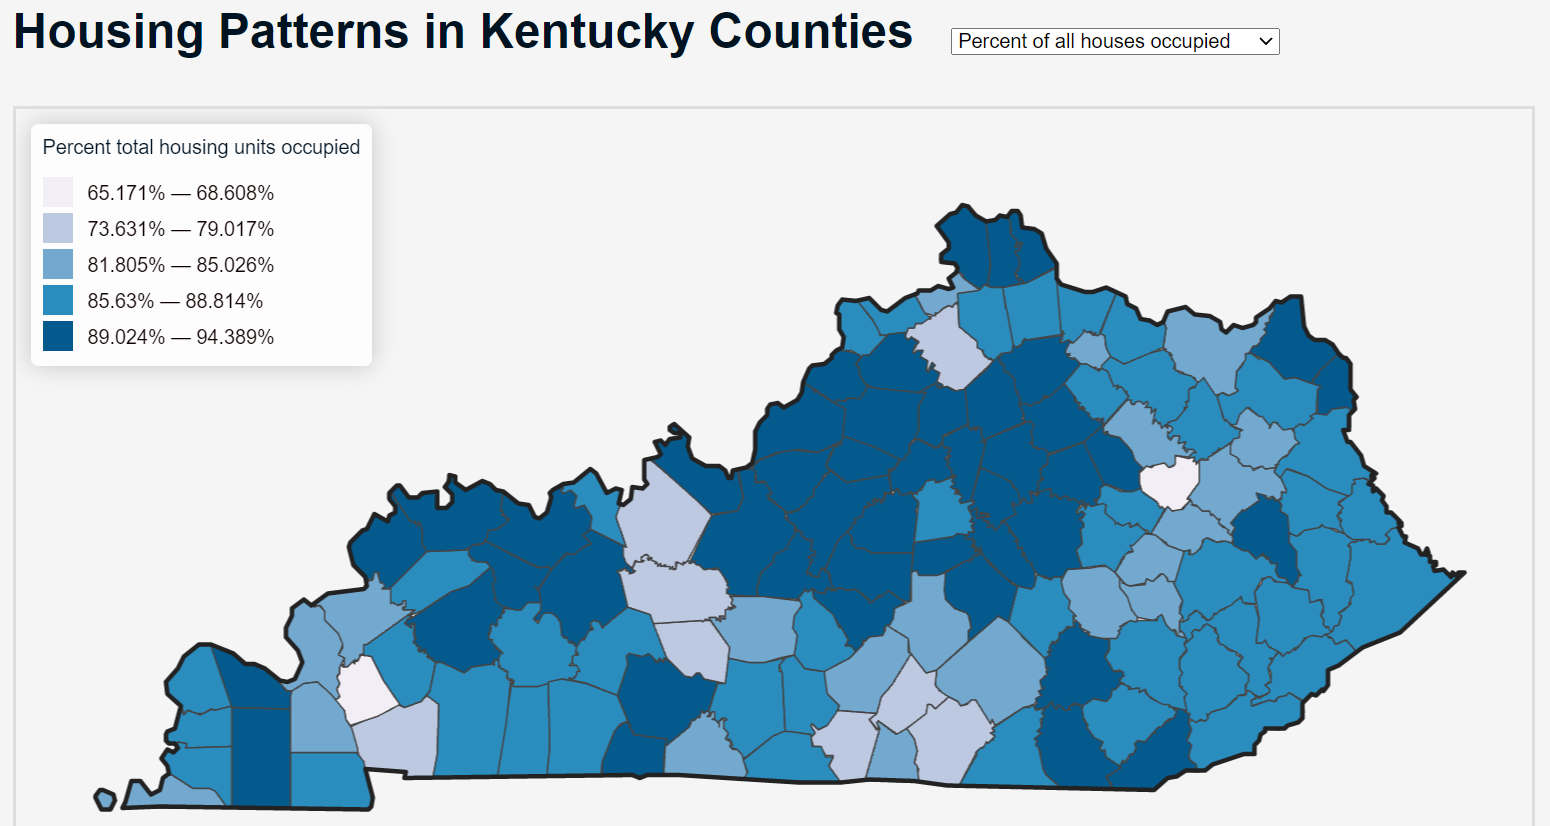 Housing Patterns in Kentucky Counties, 2010